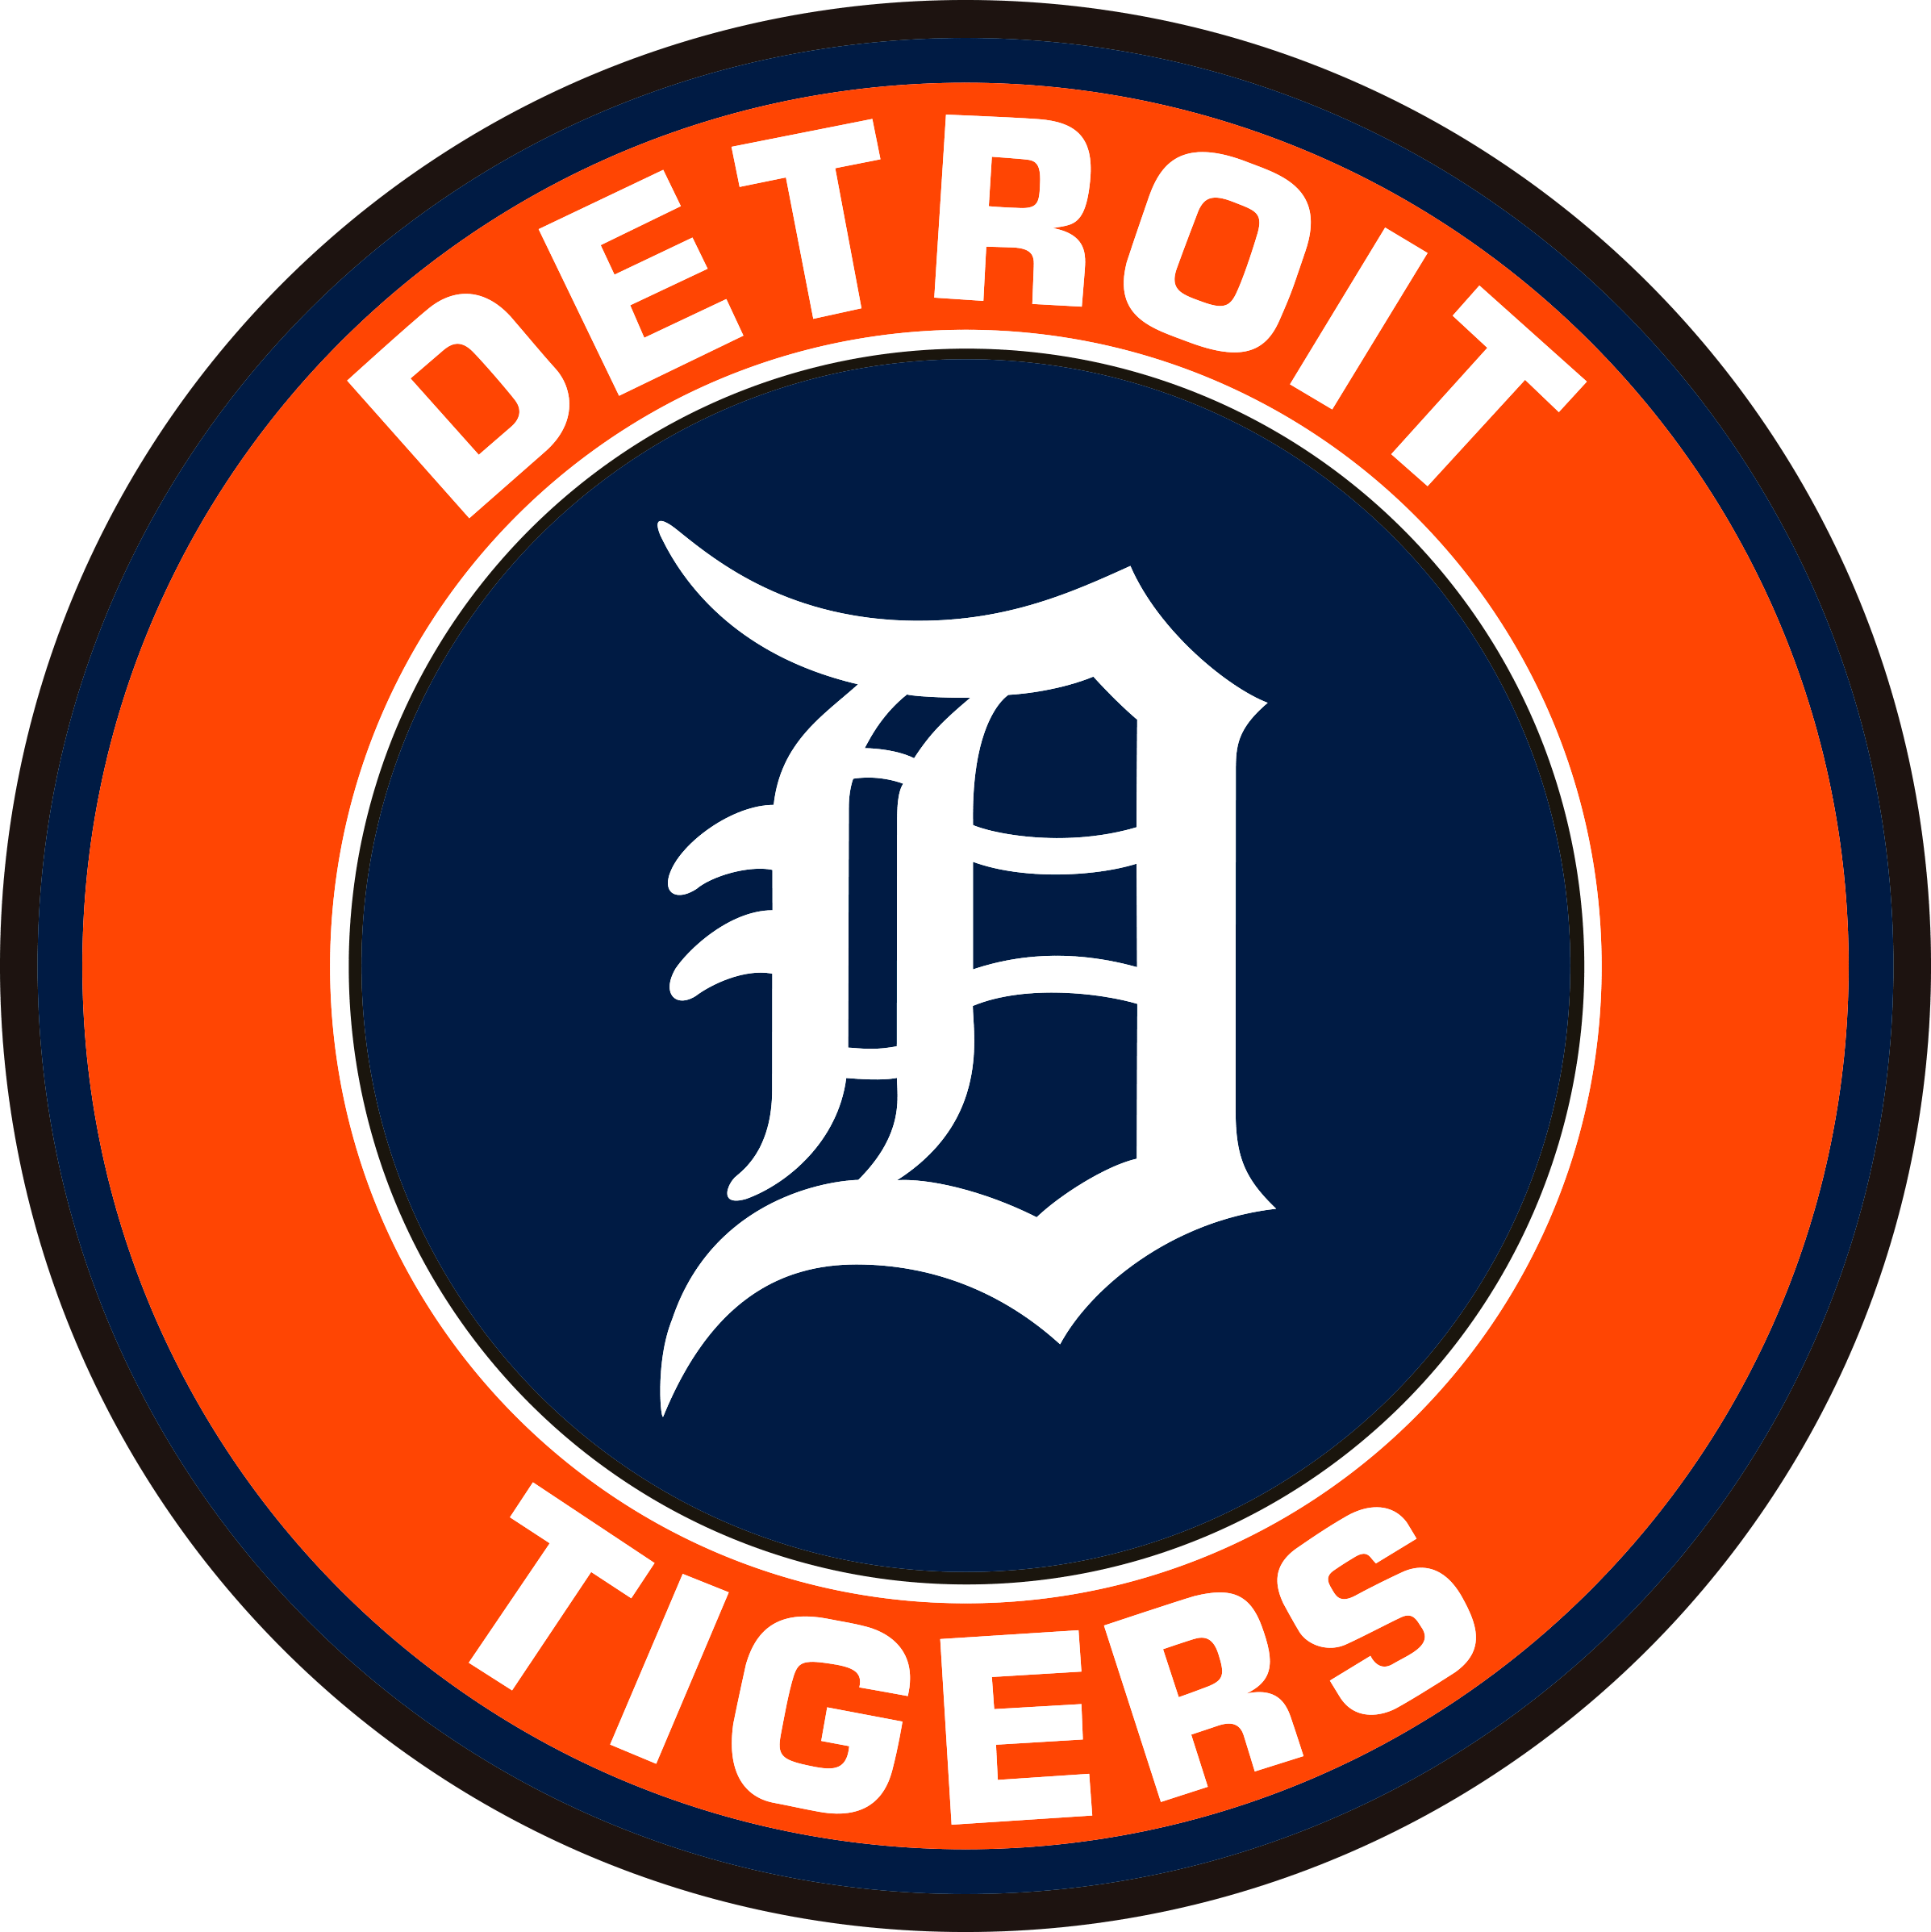 MLB Detroit Tigers SVG, SVG Files For Silhouette, Detroit Tigers